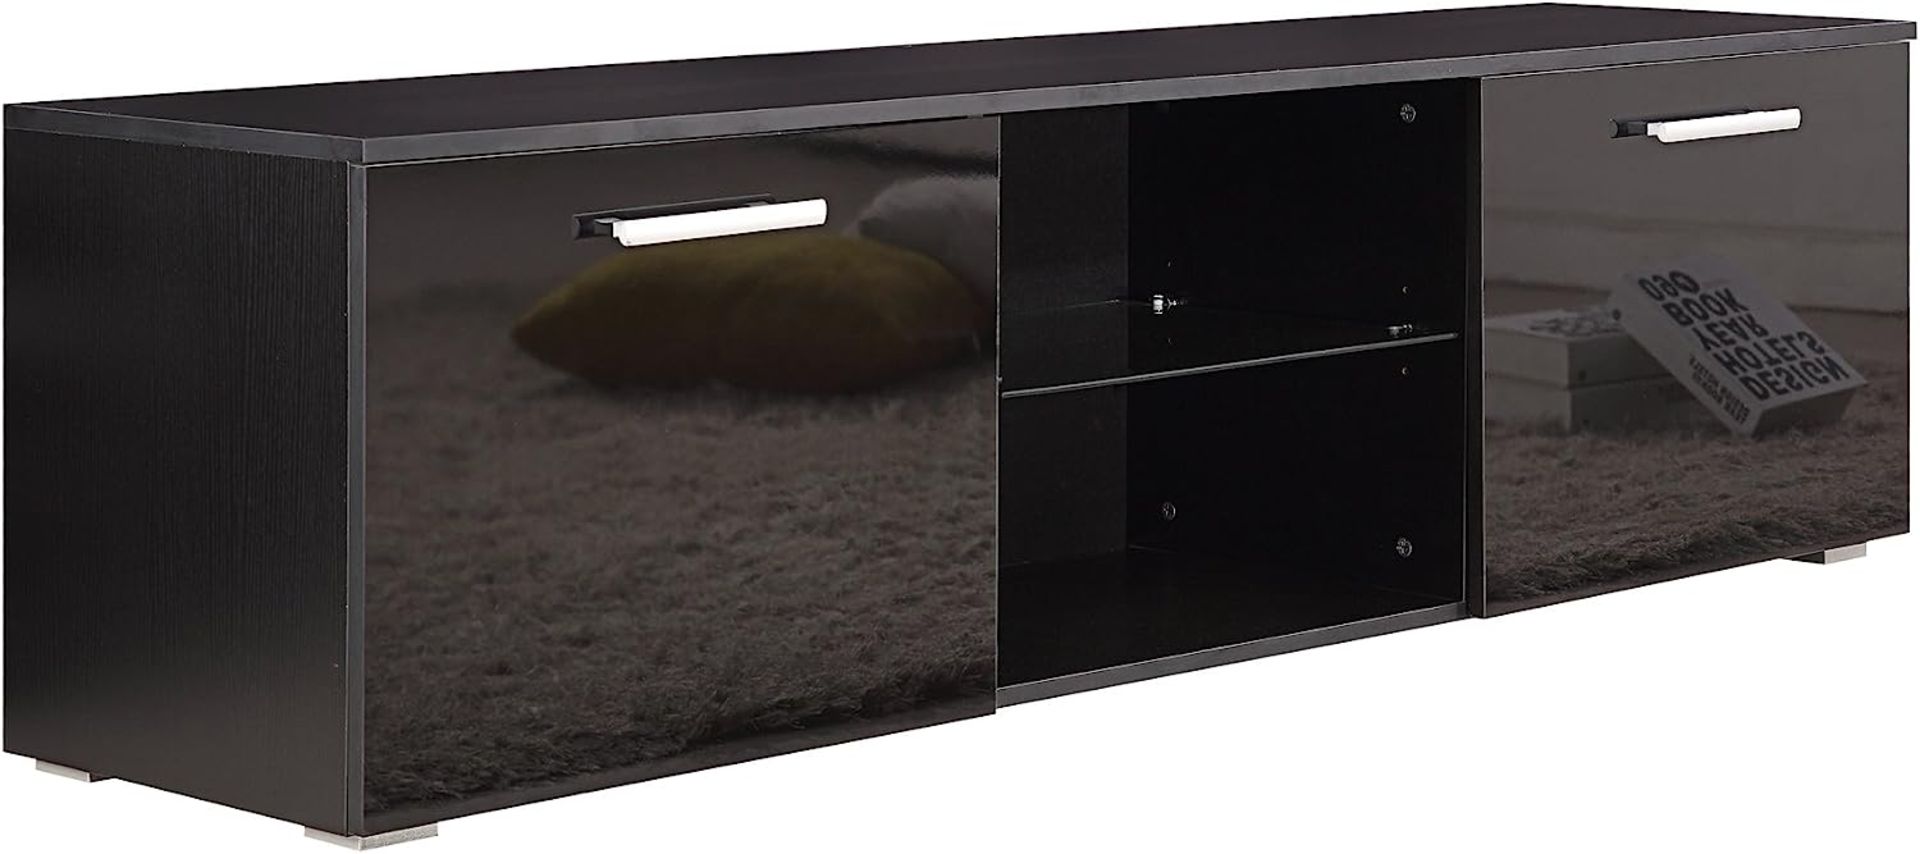 HARMIN MODERN 160CM TV STAND CABINET UNIT WITH HIGH GLOSS DOORS (BLACK ON BLACK) - Image 4 of 9